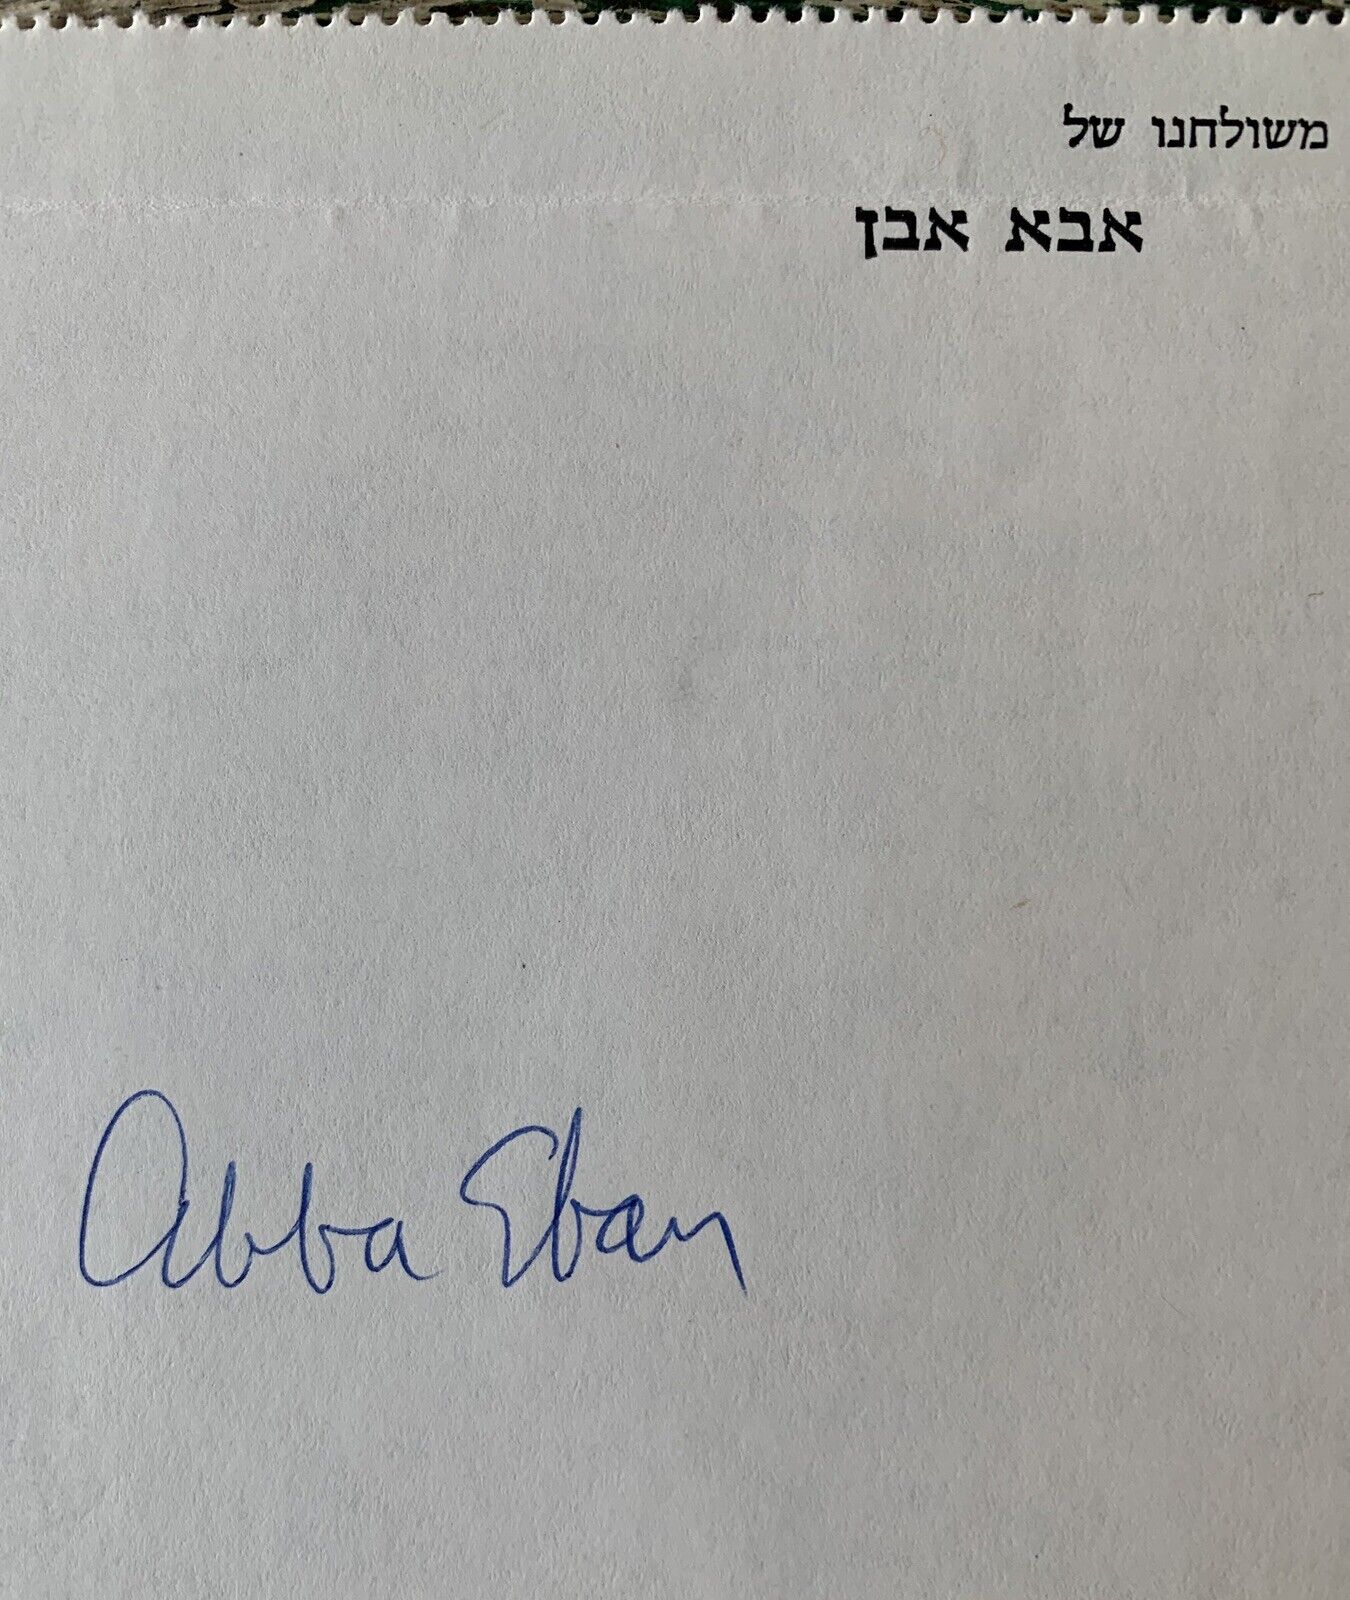 ABBA EBAN Hand Signed Autograph With Transmittal Envelope 1980 VG